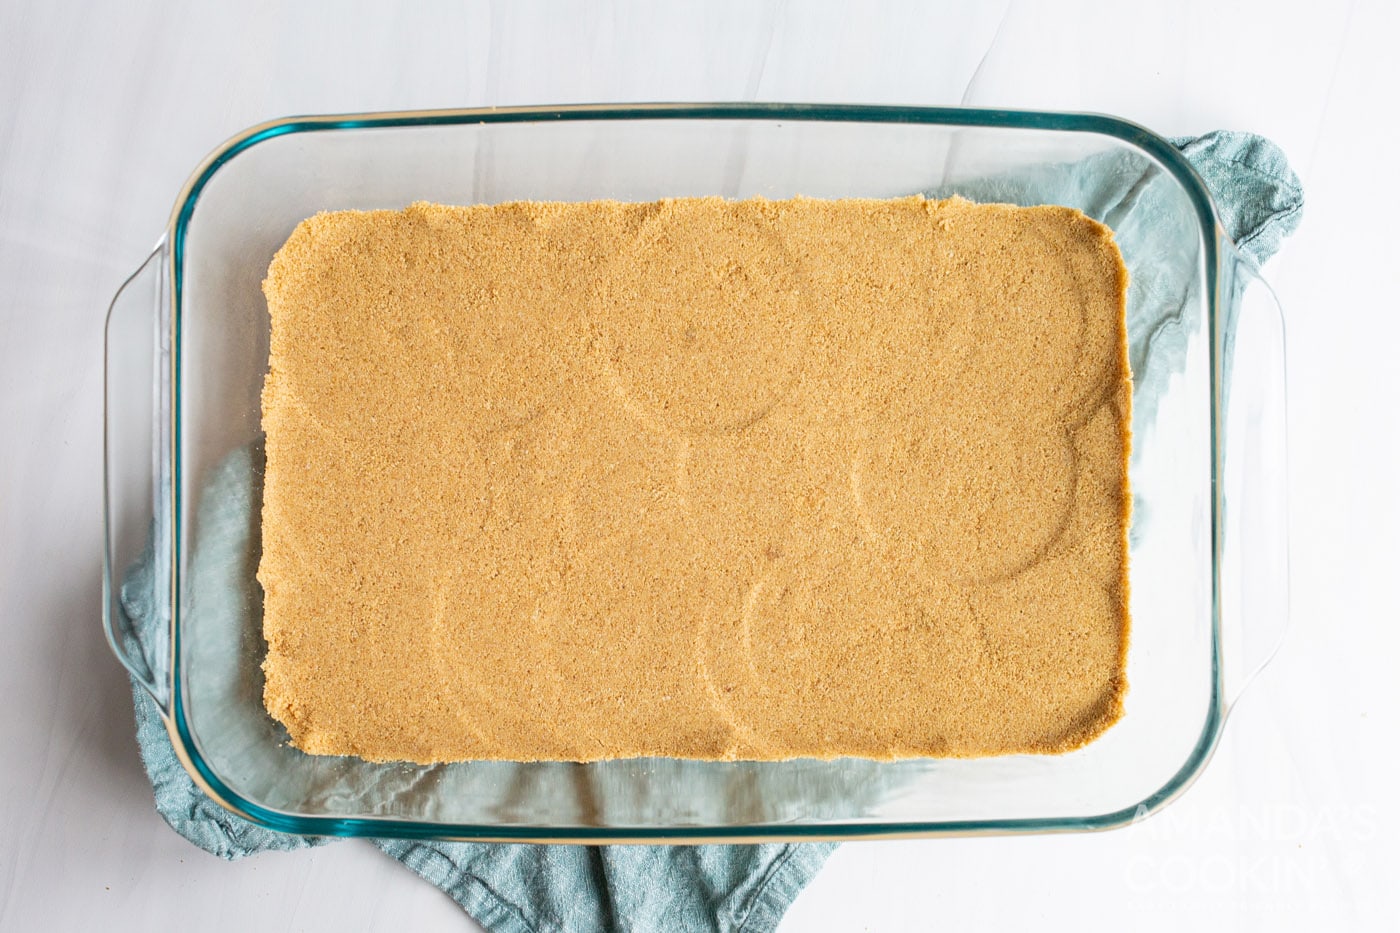 graham cracker forms a crust in a baking dish